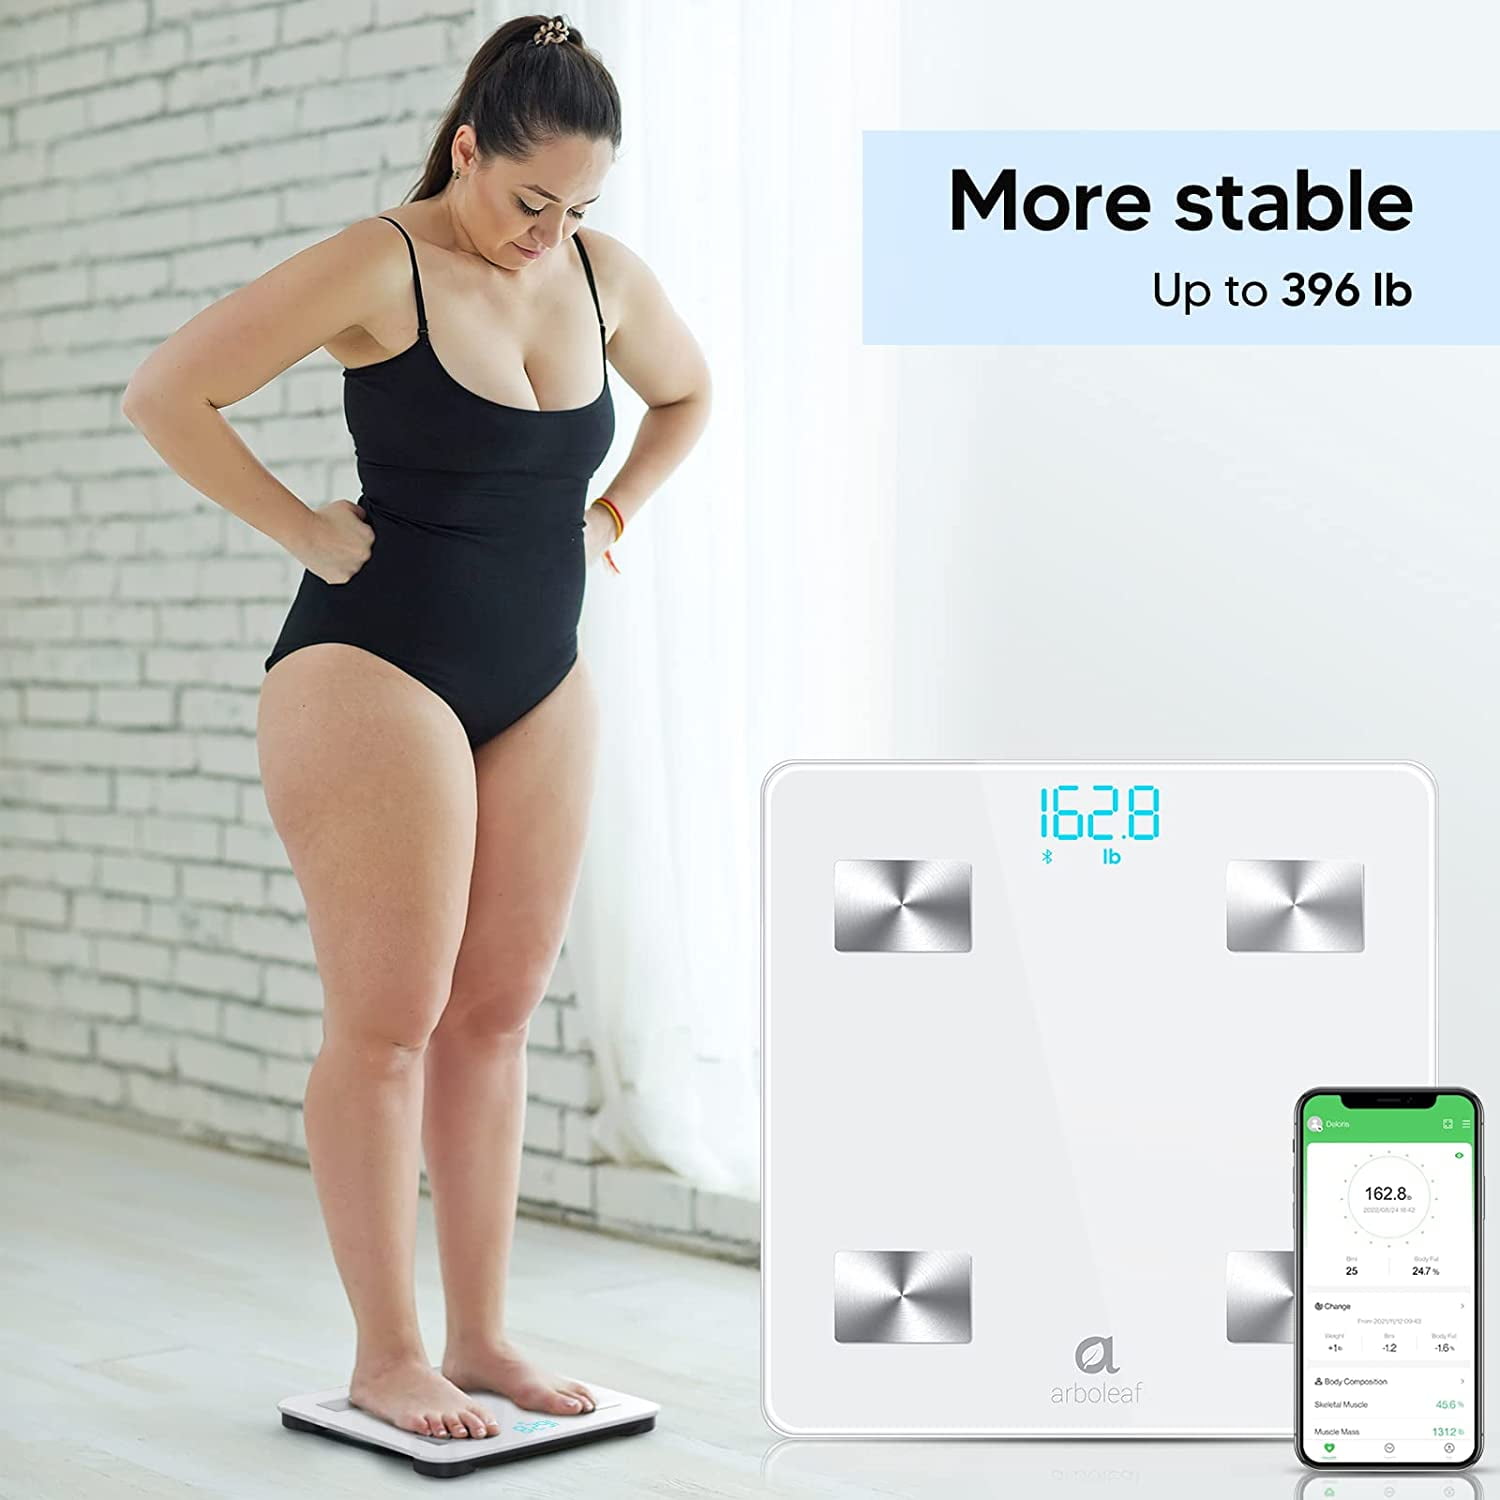 ARBOLEAF SMART SCALE  wi-fi & bluetooth weight scale for accurate  weight-tracking & fitness 